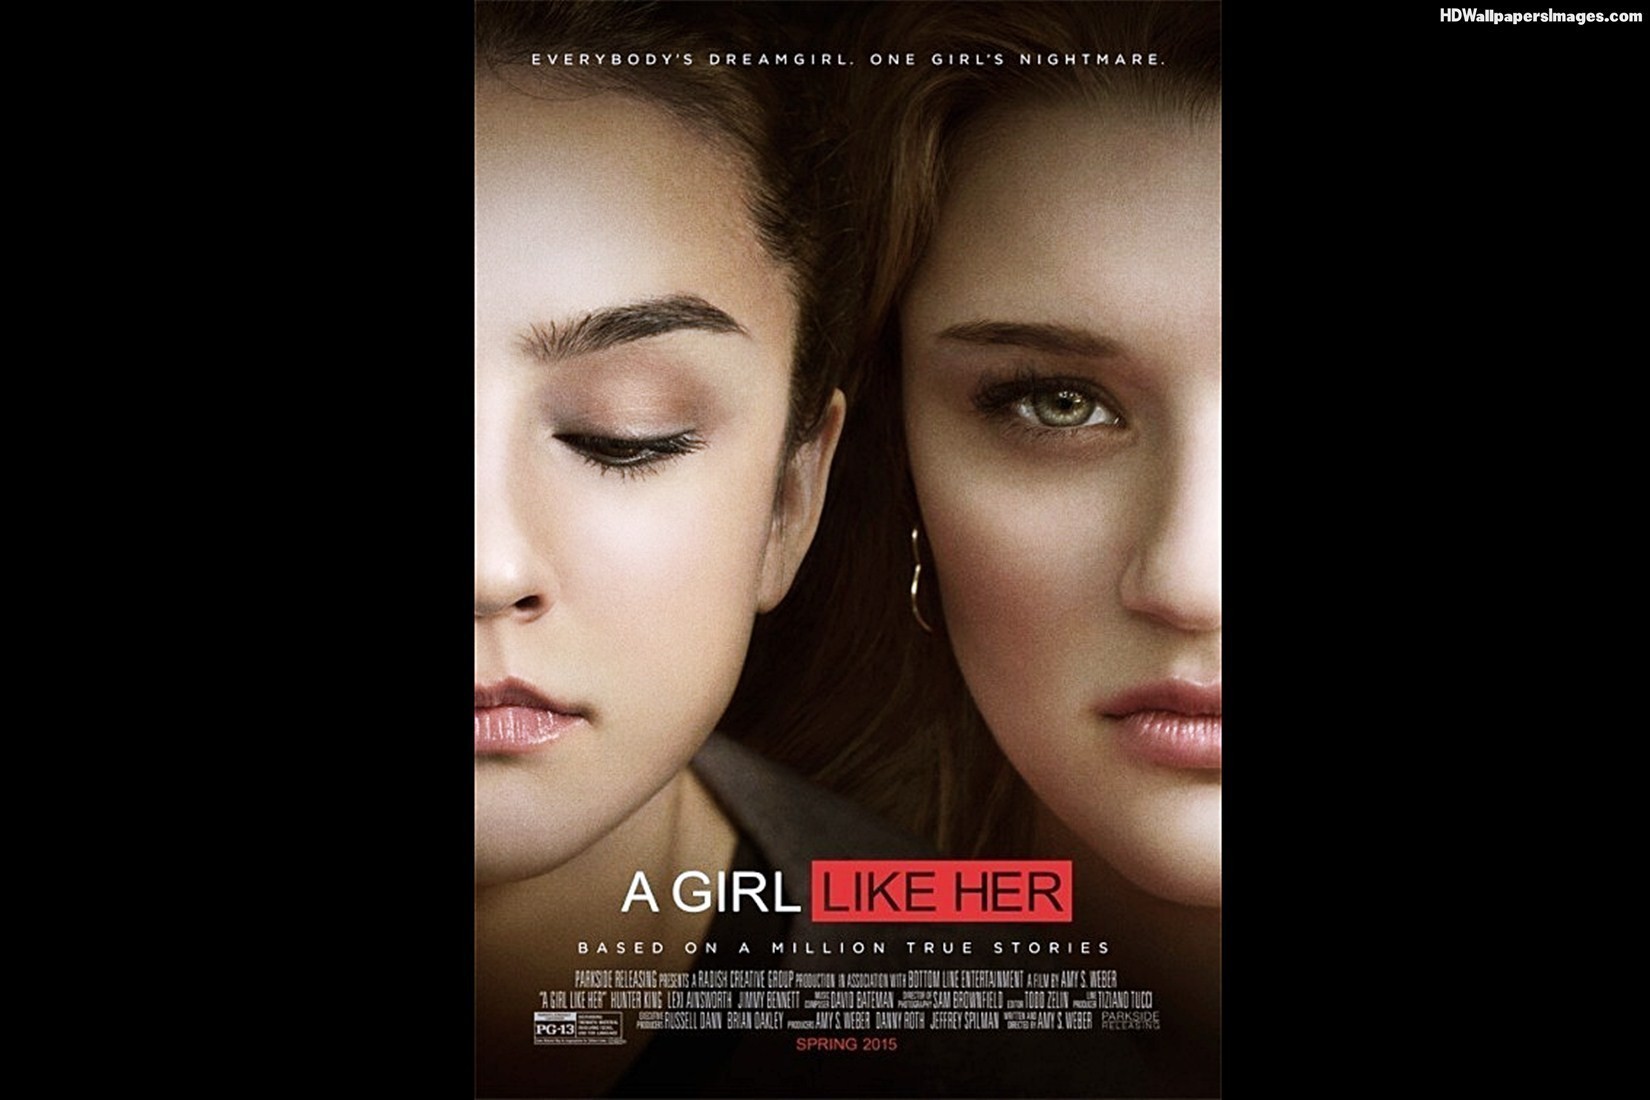 Teenlink Review A Girl Like Her Is A Powerful Movie